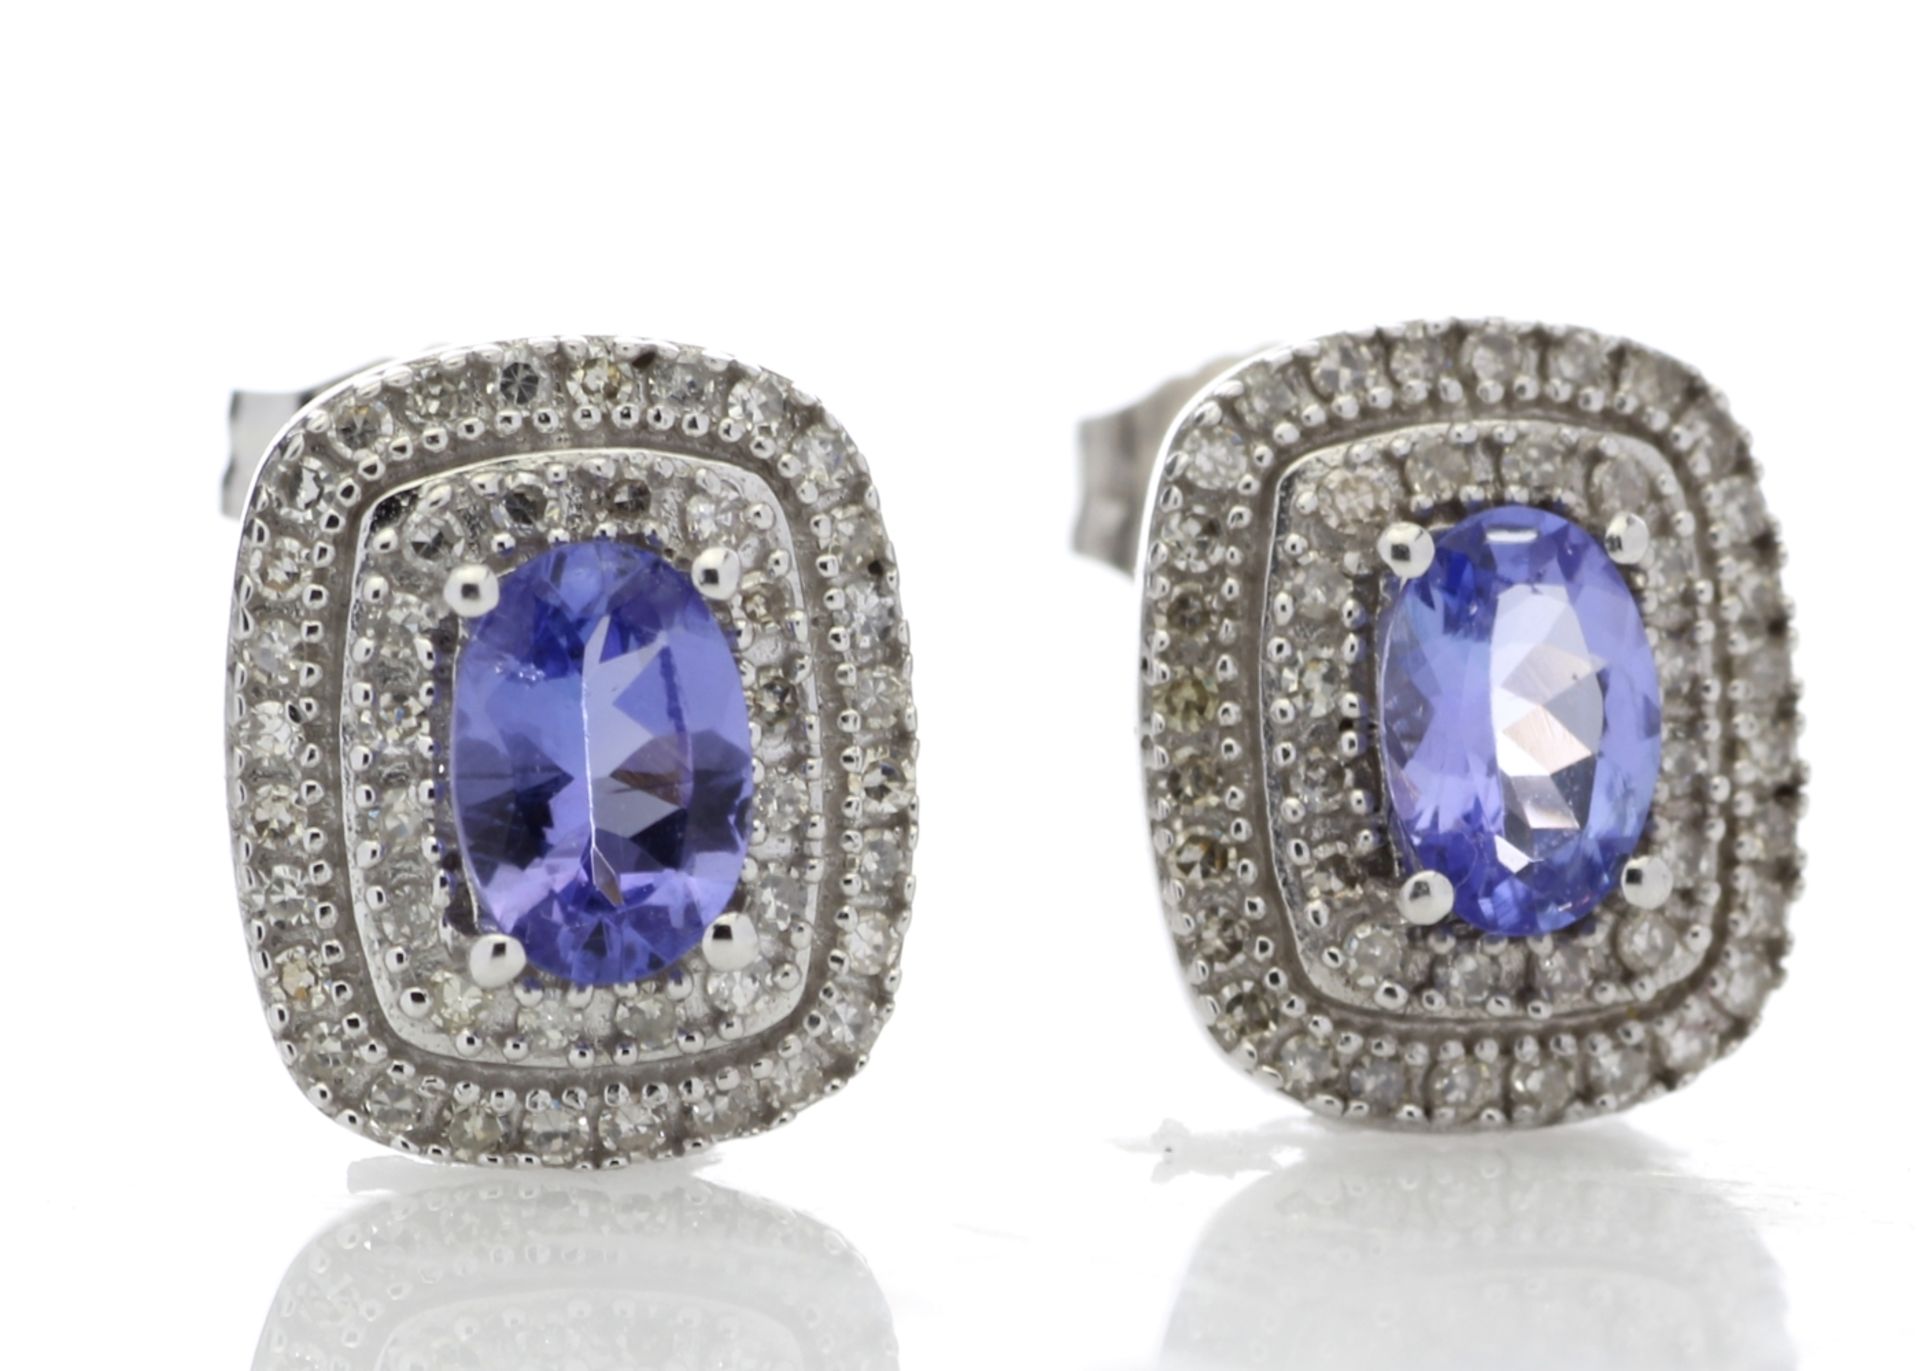 9ct White Gold Oval Diamond And Tanzanite Earring 0.35 Carats - Valued by GIE £3,320.00 - Unique and - Image 4 of 5